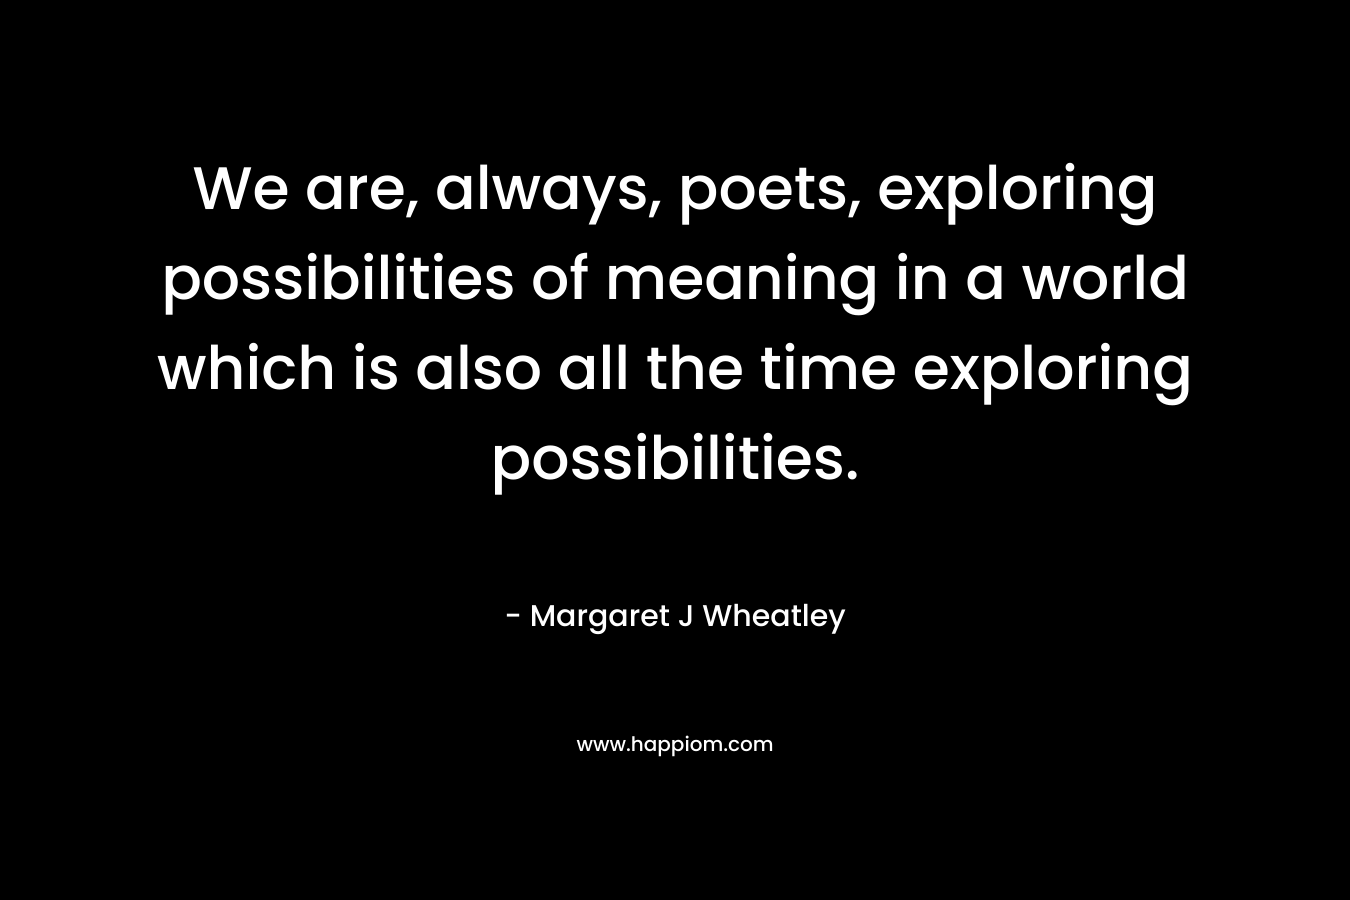 We are, always, poets, exploring possibilities of meaning in a world which is also all the time exploring possibilities. – Margaret J Wheatley